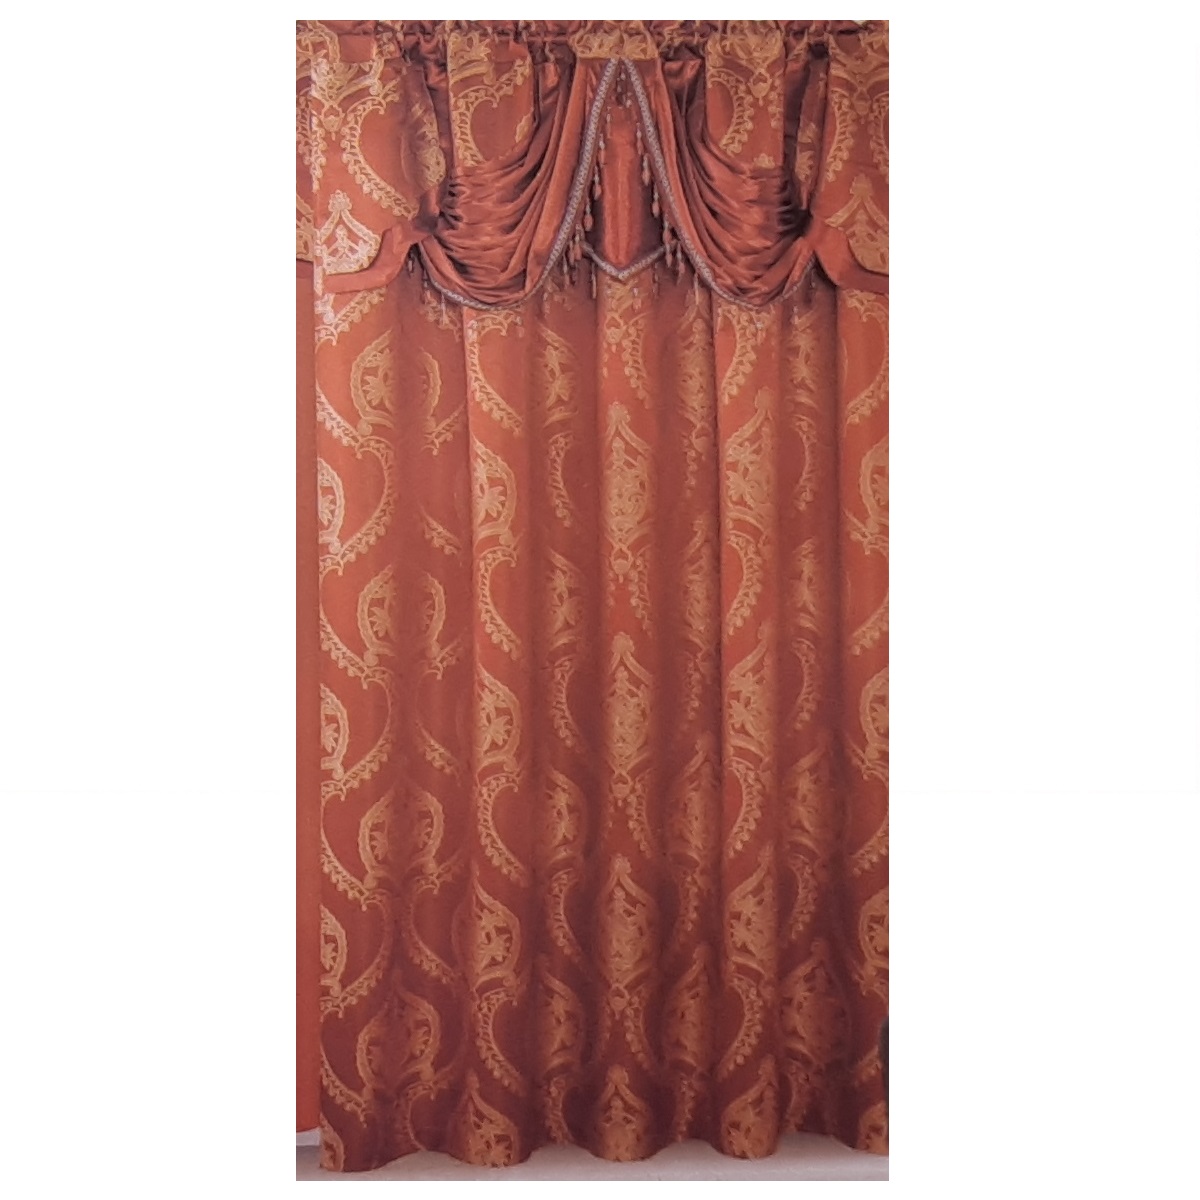 Window Curtains Set - Rust and Gold Drapes - 2 piece set with liner and valance